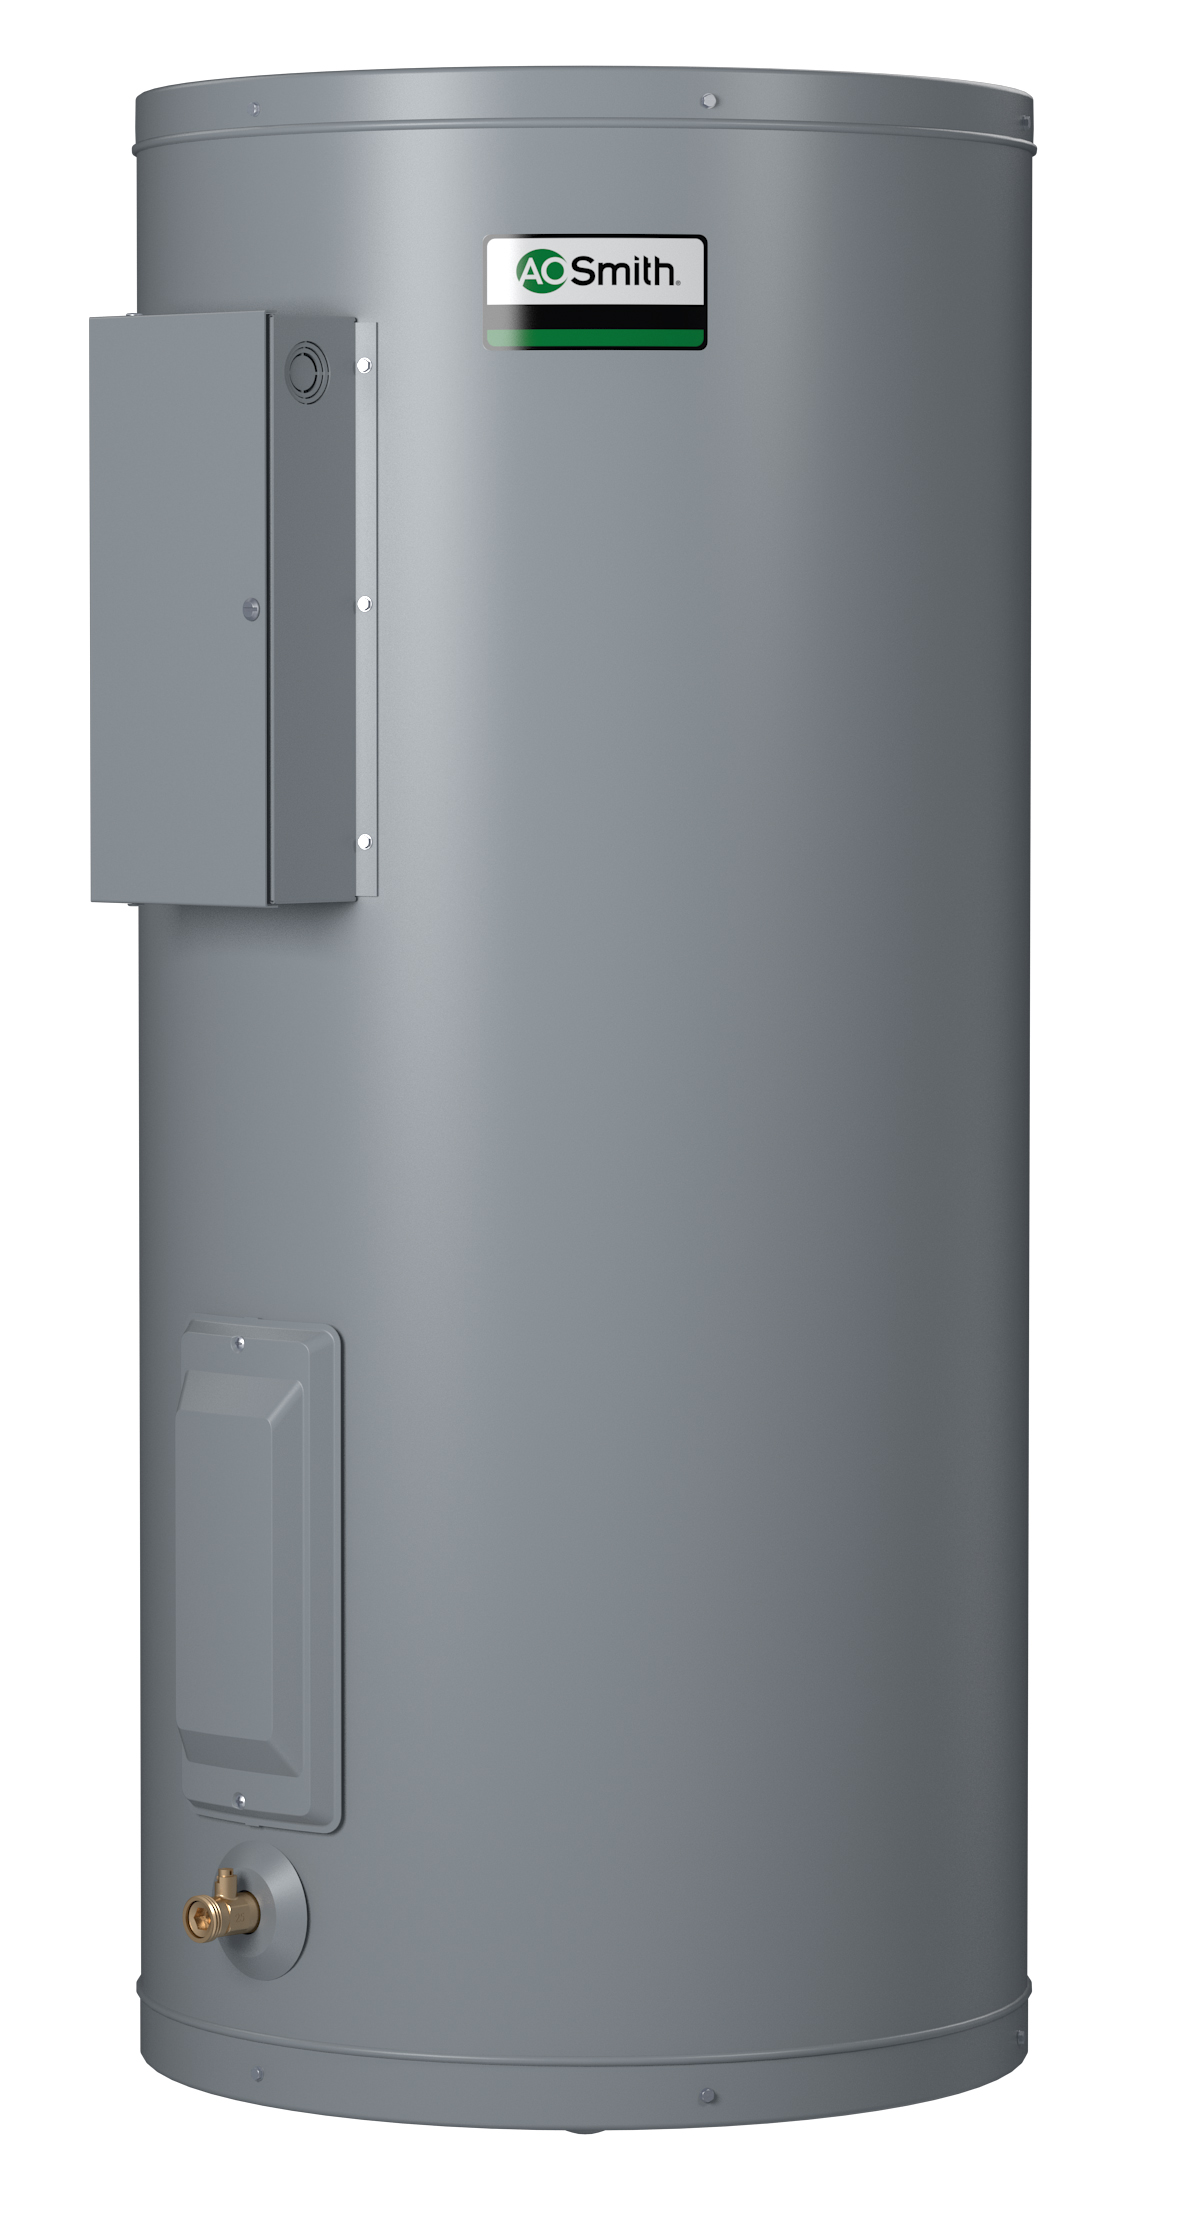 AO SMITH DEN-40D: 50 GALLONS, 2.0KW, 480 VOLT, 3 PHASE, (2-2000 WATT ELEMENTS, NON-SIMULTANEOUS WIRING), DURA-POWER, LIGHT DUTY COMMERCIAL ELECTRIC WATER HEATER